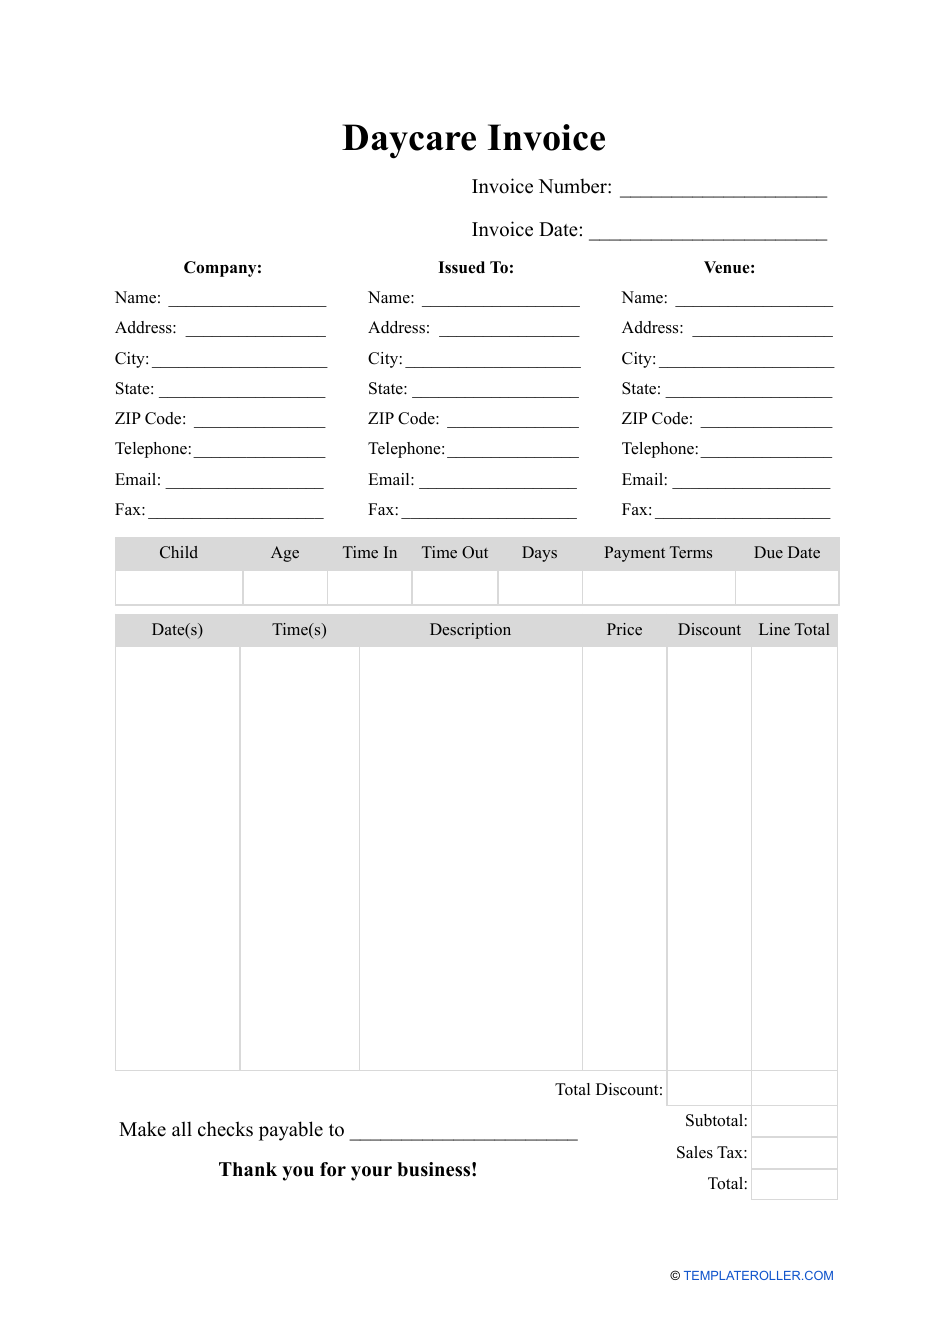 Daycare Invoice Template Download Fillable PDF | Templateroller